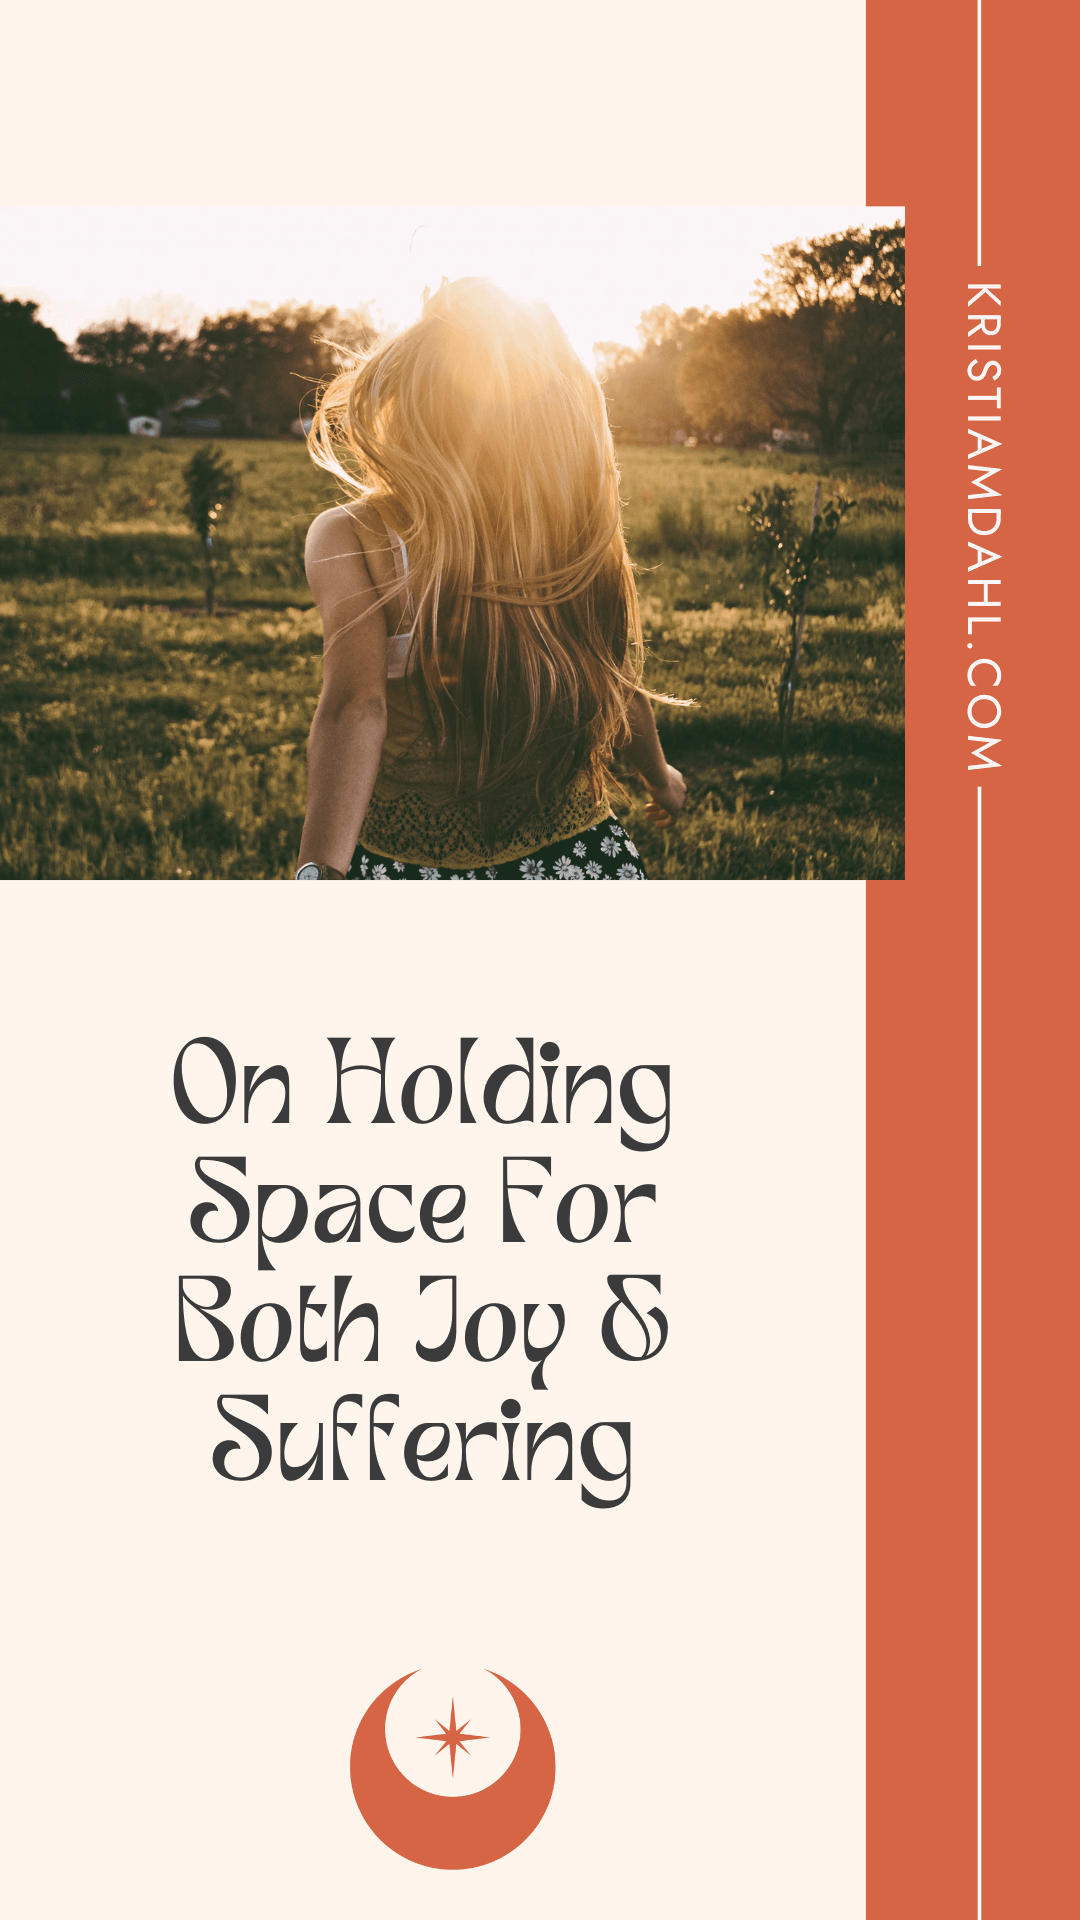 Being able to hold space for both joy and suffering is a sign of emotional maturity and the ability to construct energetic boundaries. via @kristi_amdahl